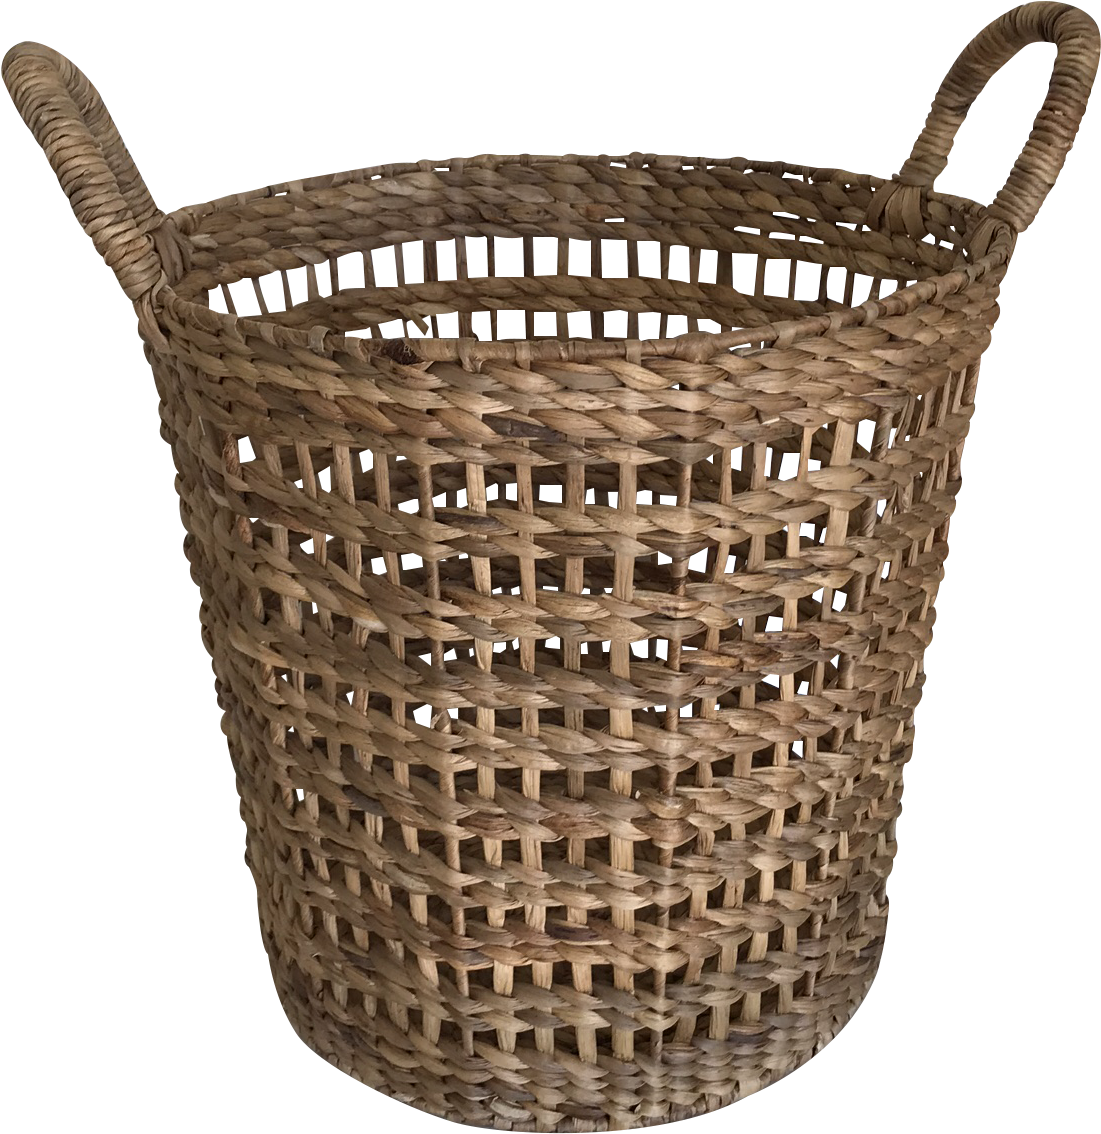 Bicycle Baskets Wicker Common reed - Bicycle png download - 750*750